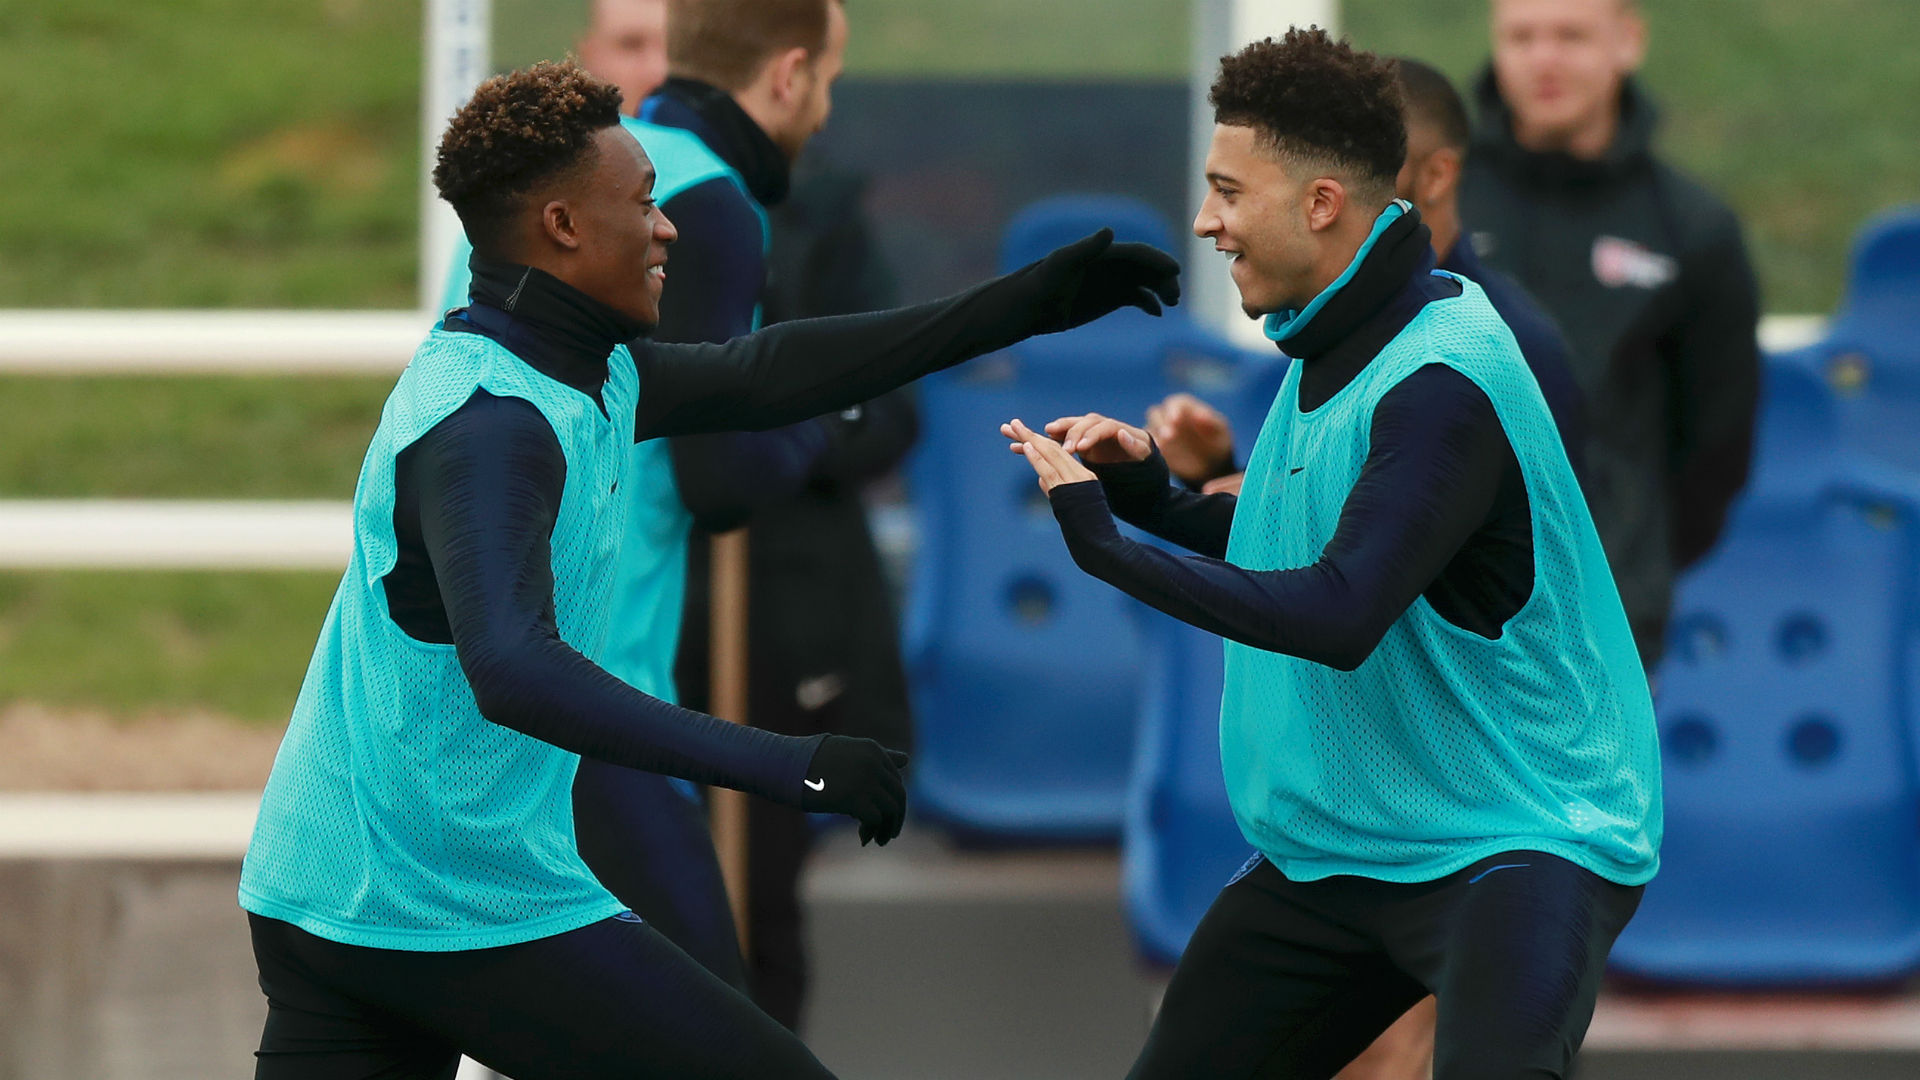 Marcus Rashford will miss England's upcoming matches, but Gareth Southgate is excited to give Jadon Sancho and Callum Hudson-Odoi chances.